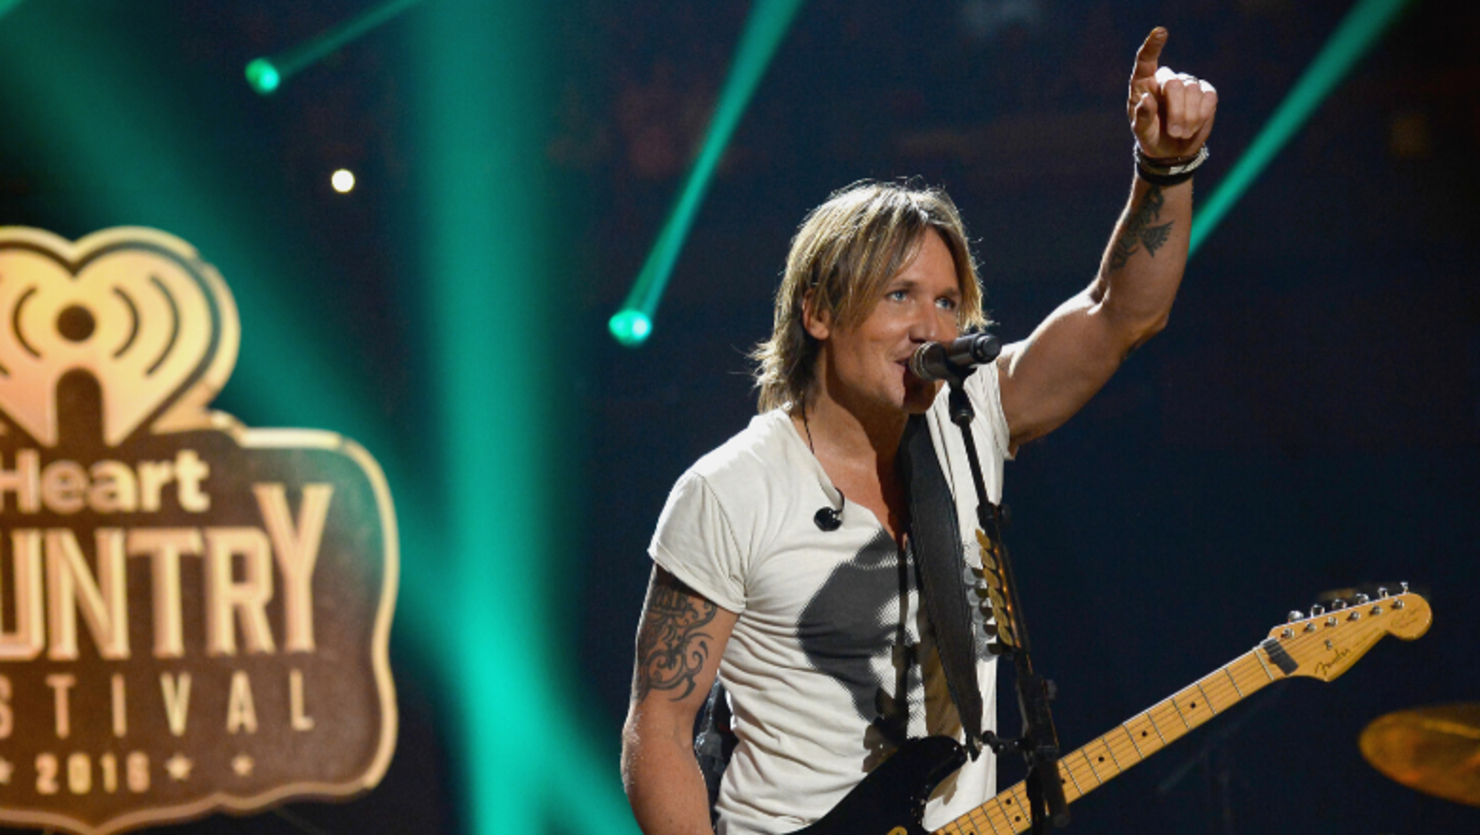 Keith Urban Is 'Absolutely' Hoping To Do More Drive-In Concerts